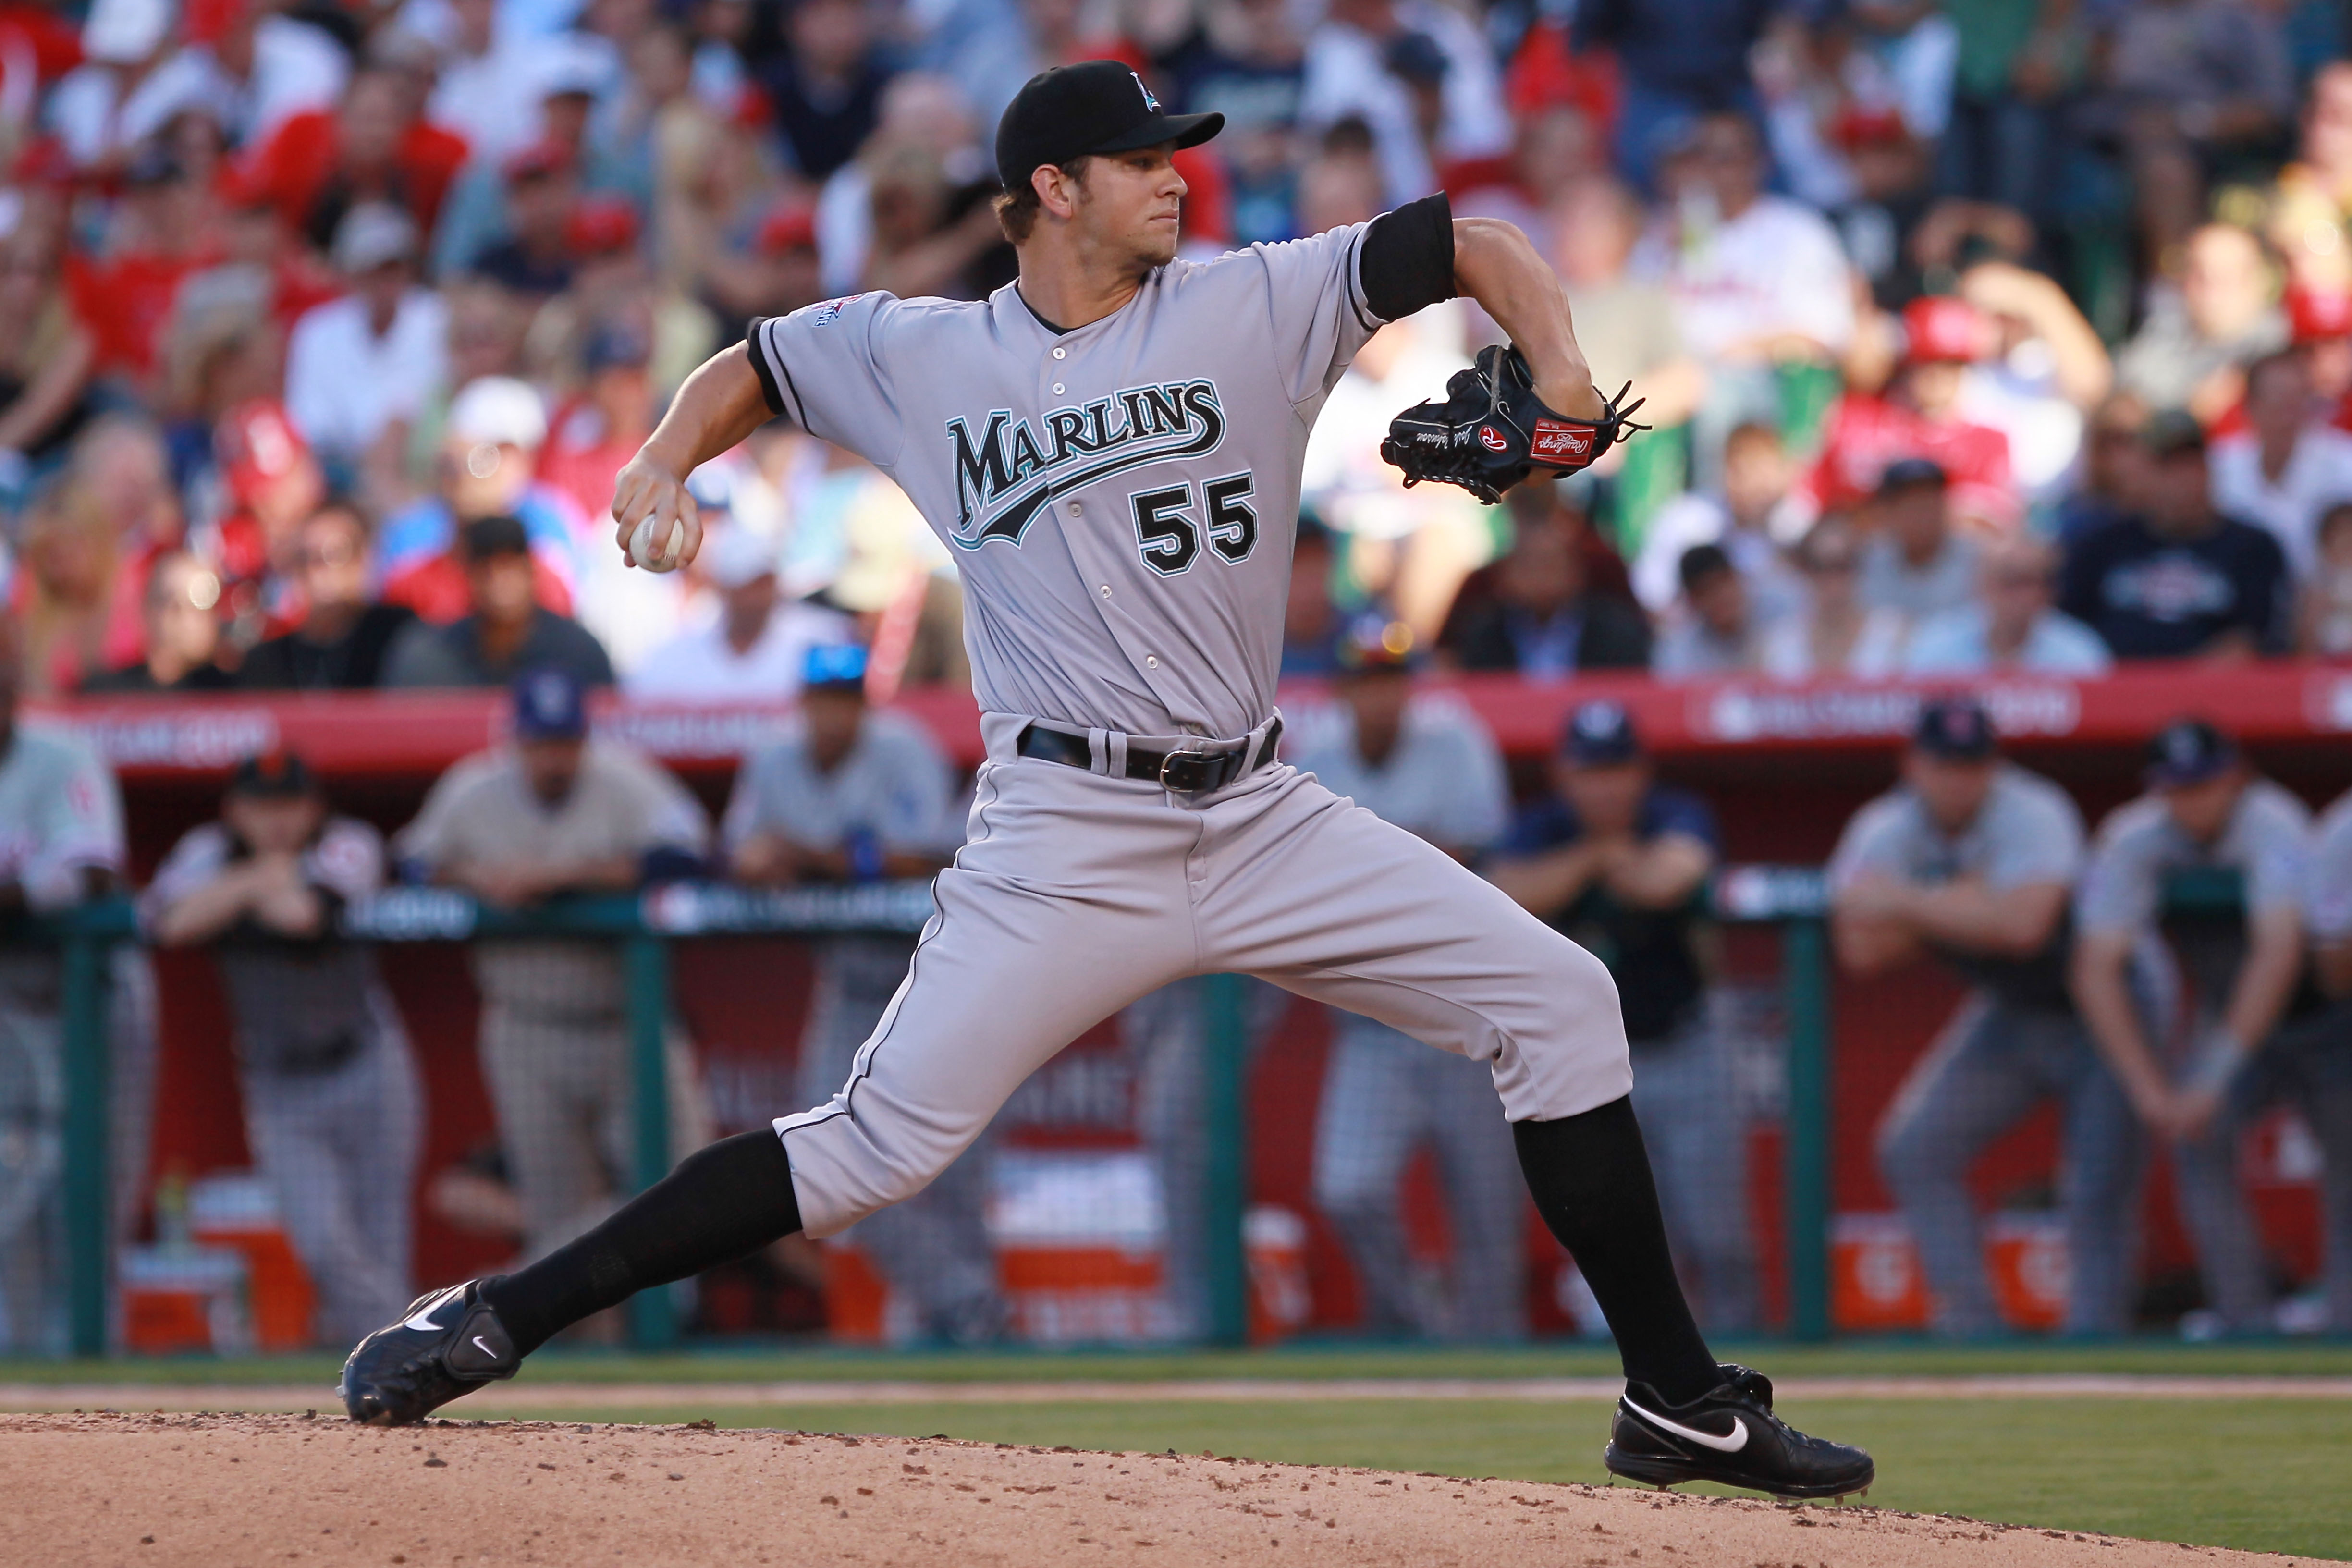 Clay Hensley excited about his return to Florida Marlins's starting rotation